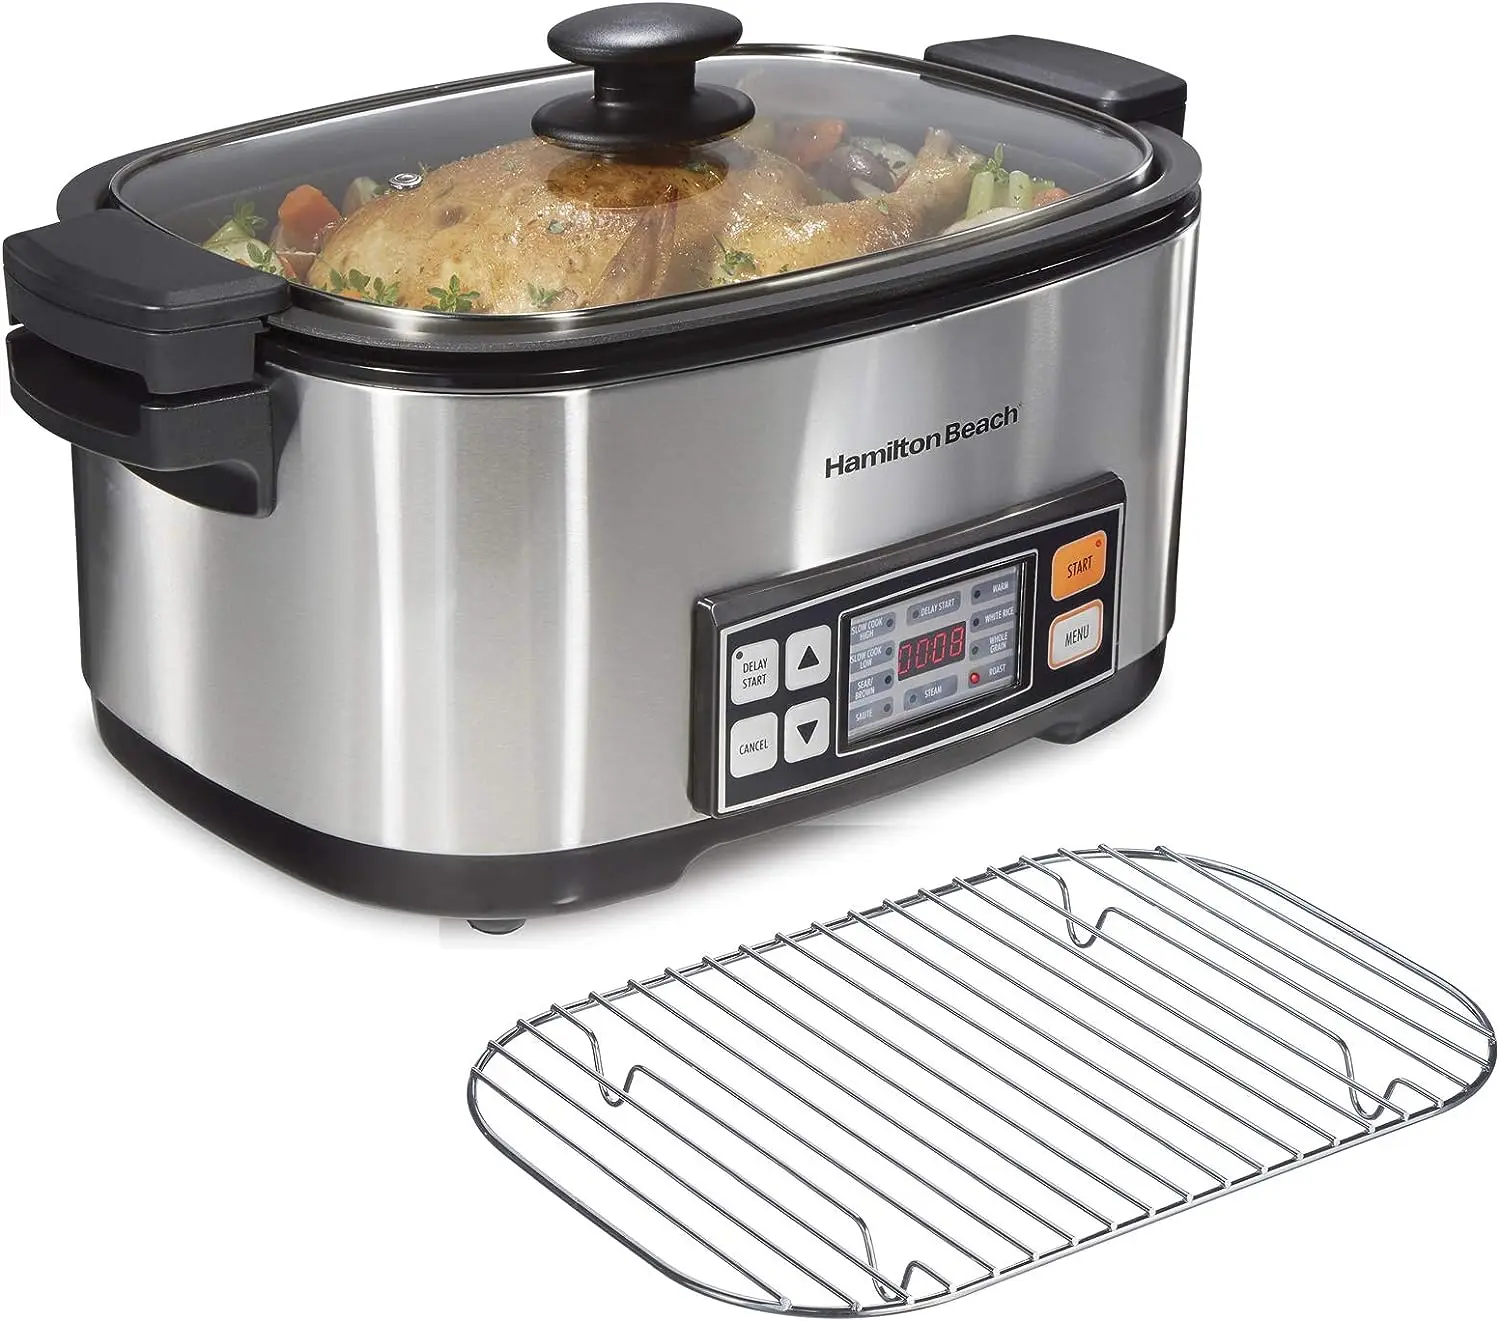 

Digital Programmable Slow Cooker with 6 quart Nonstick Crock, Sear, Saute, Steam, Rice Functions, Stainless Steel (33065)